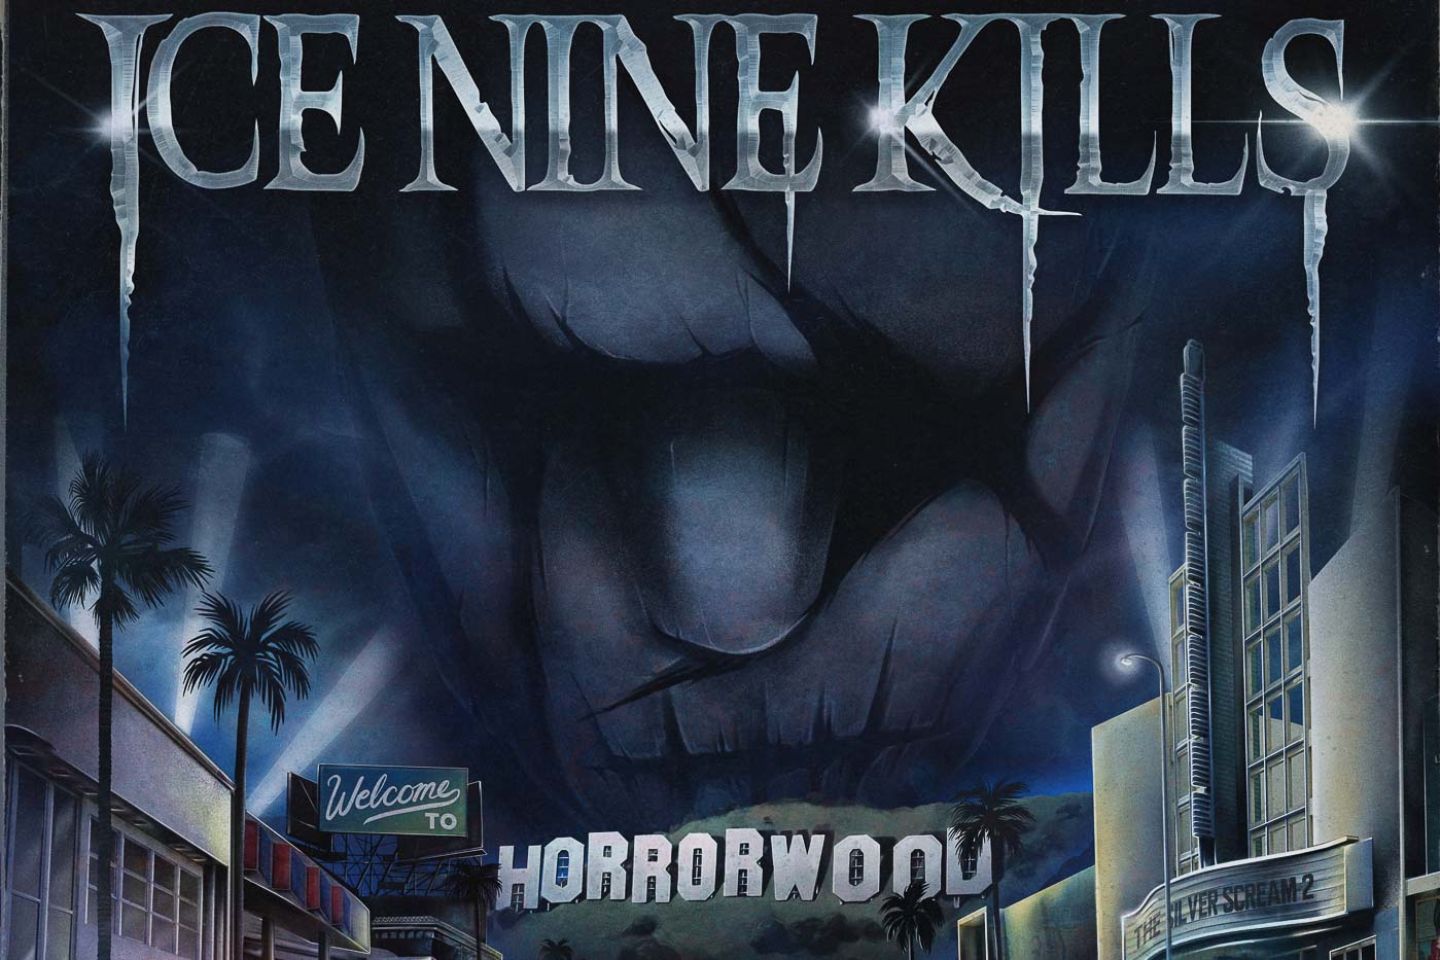 Ice Nine Kills “The Silver Scream 2: Welcome To Horrorwood” (Fearless Records, 2021)